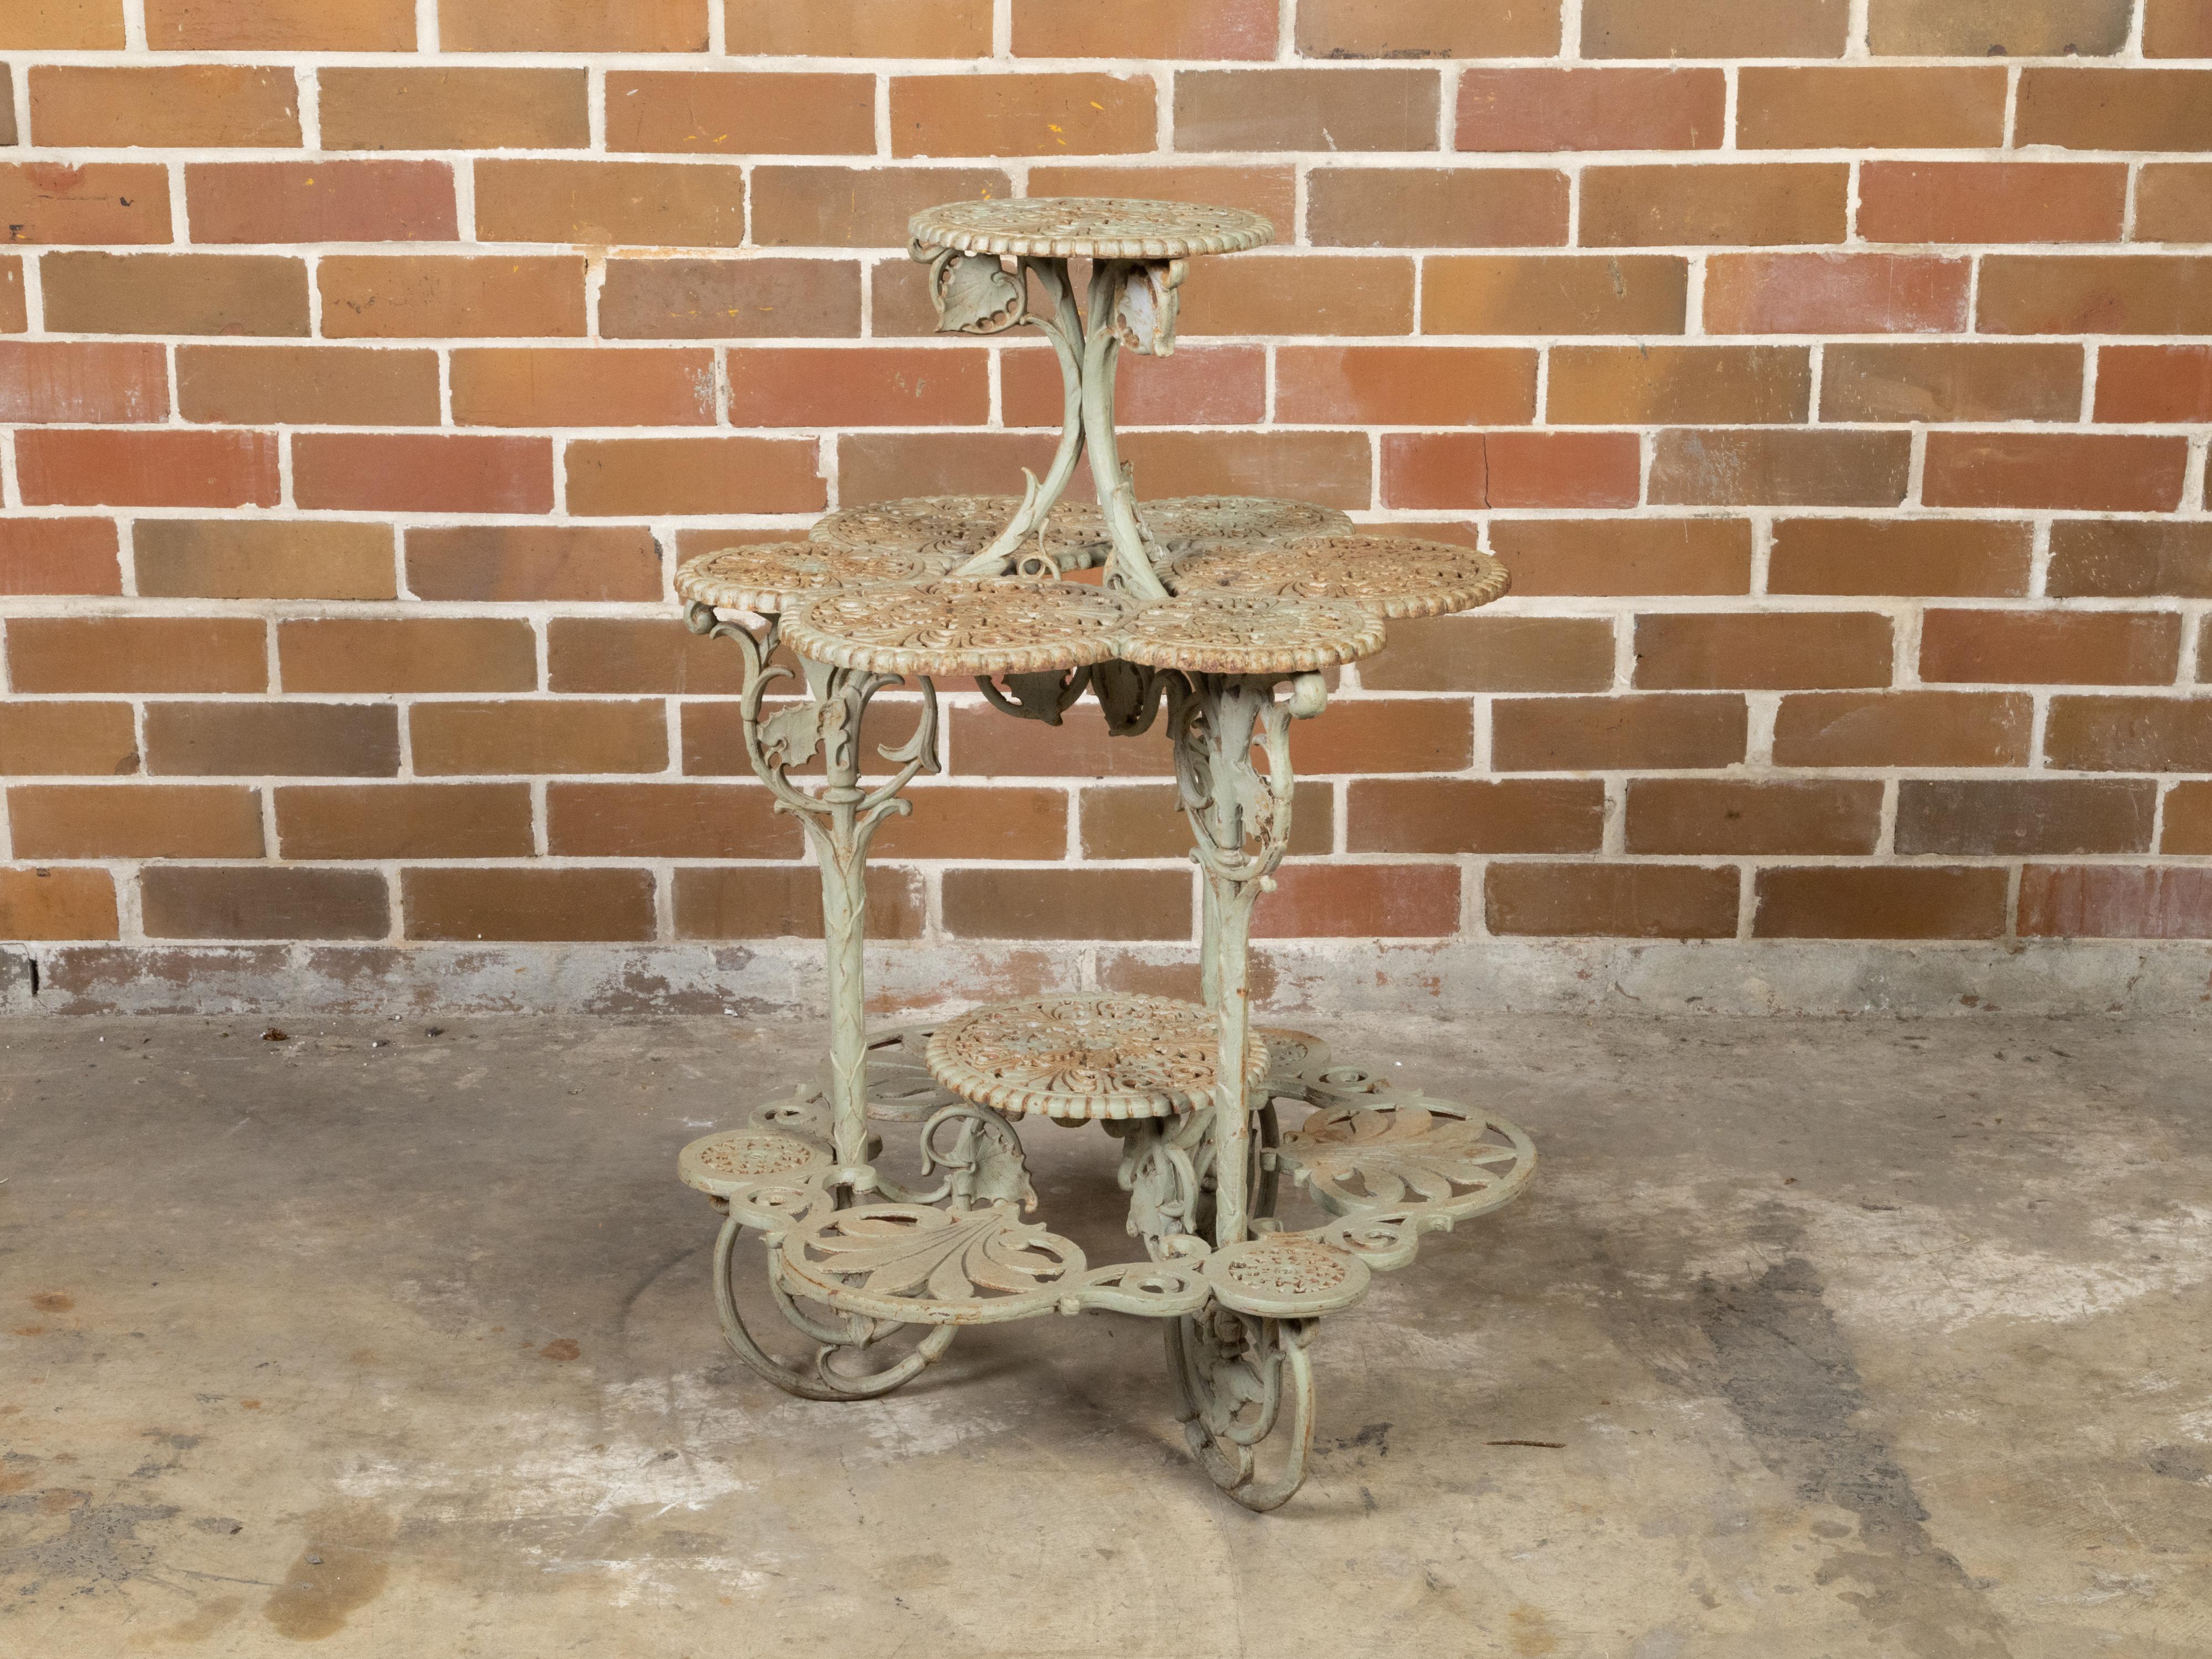 An English iron tiered table from the 19th century with four levels, circular openwork sections and large scrolling feet. Created in England during the 19th century, this uncommon iron tiered table features a circular pierced top adorned with ornate